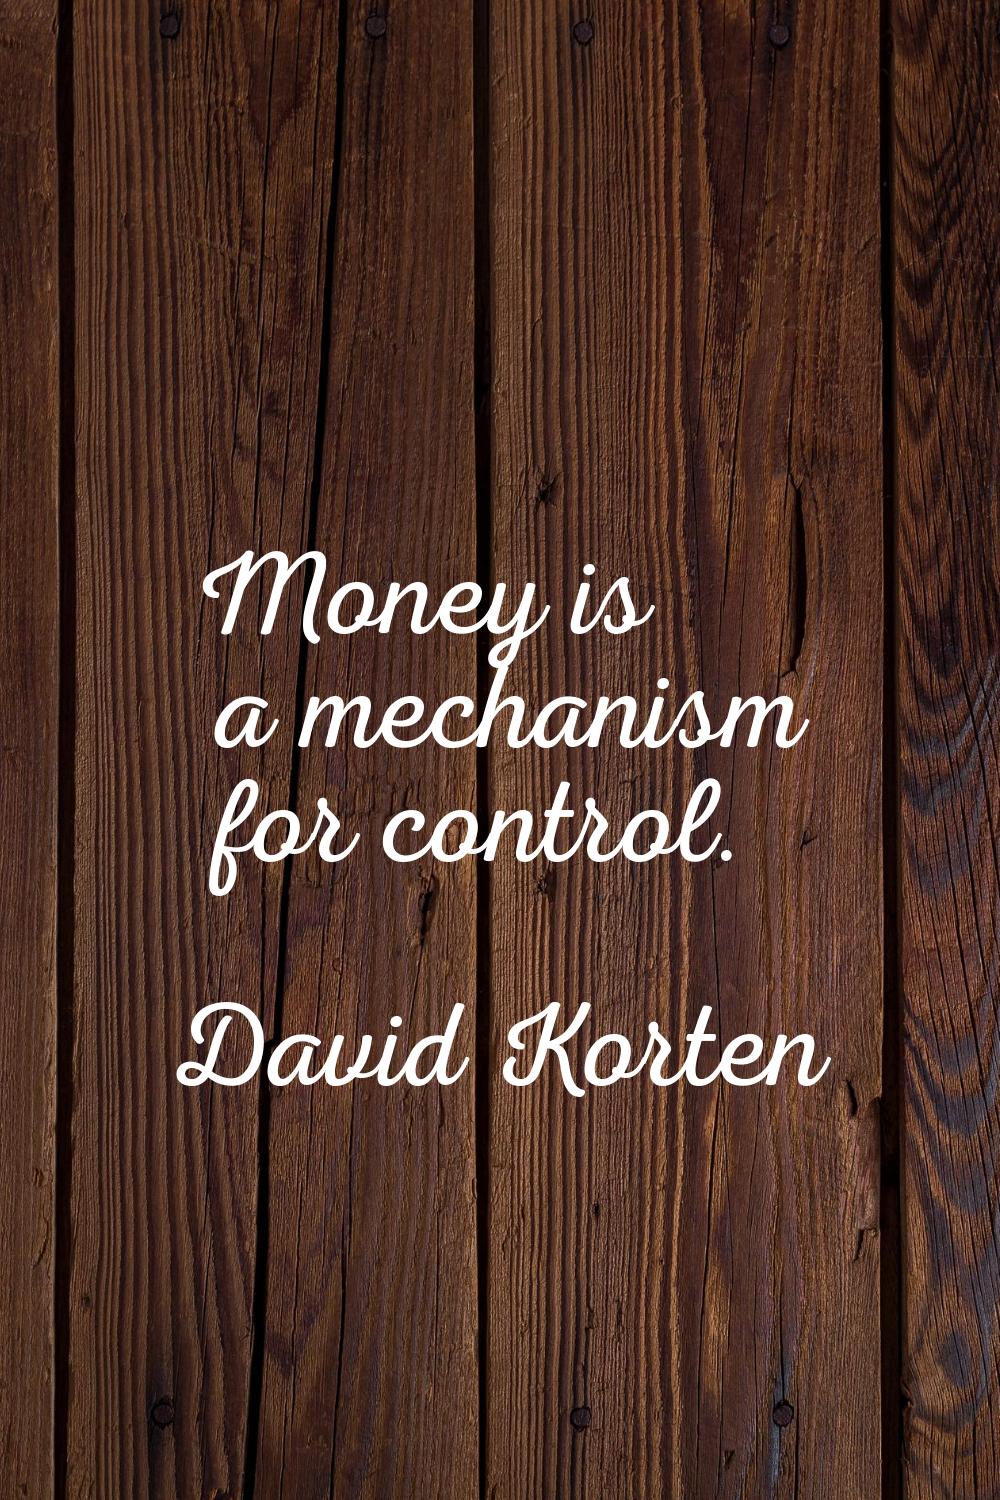 Money is a mechanism for control.